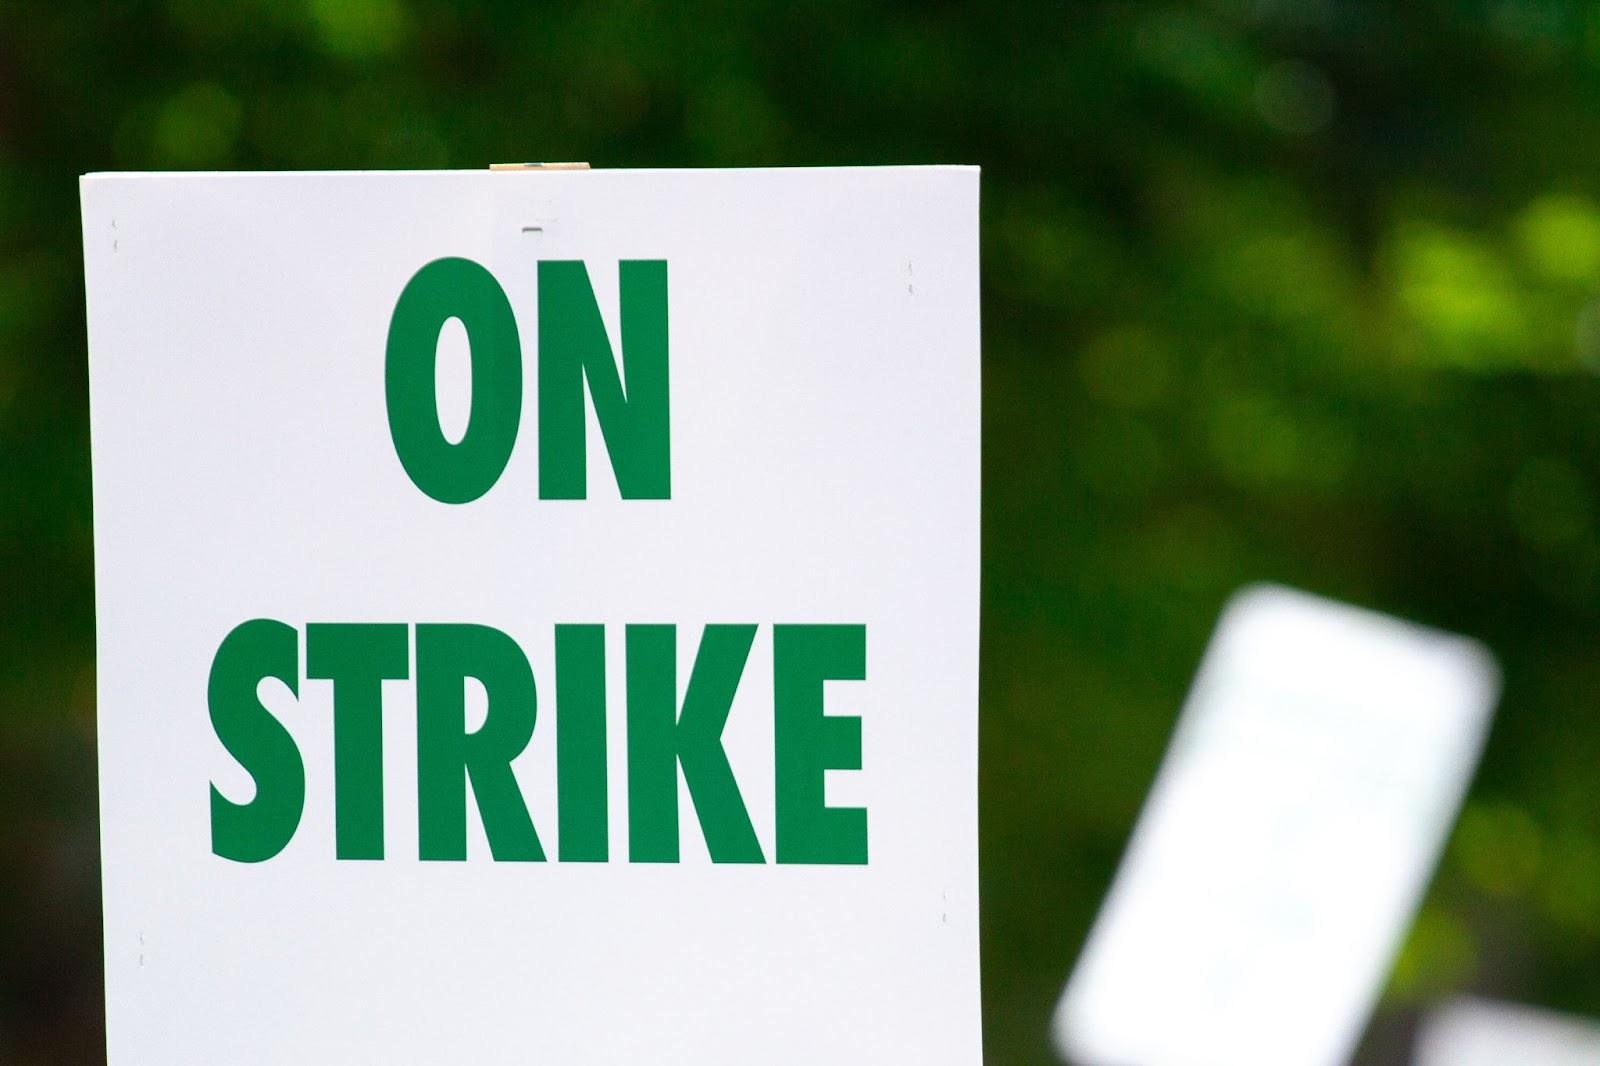 Secondary school teachers ramp up strike activity, and get paid while doing it